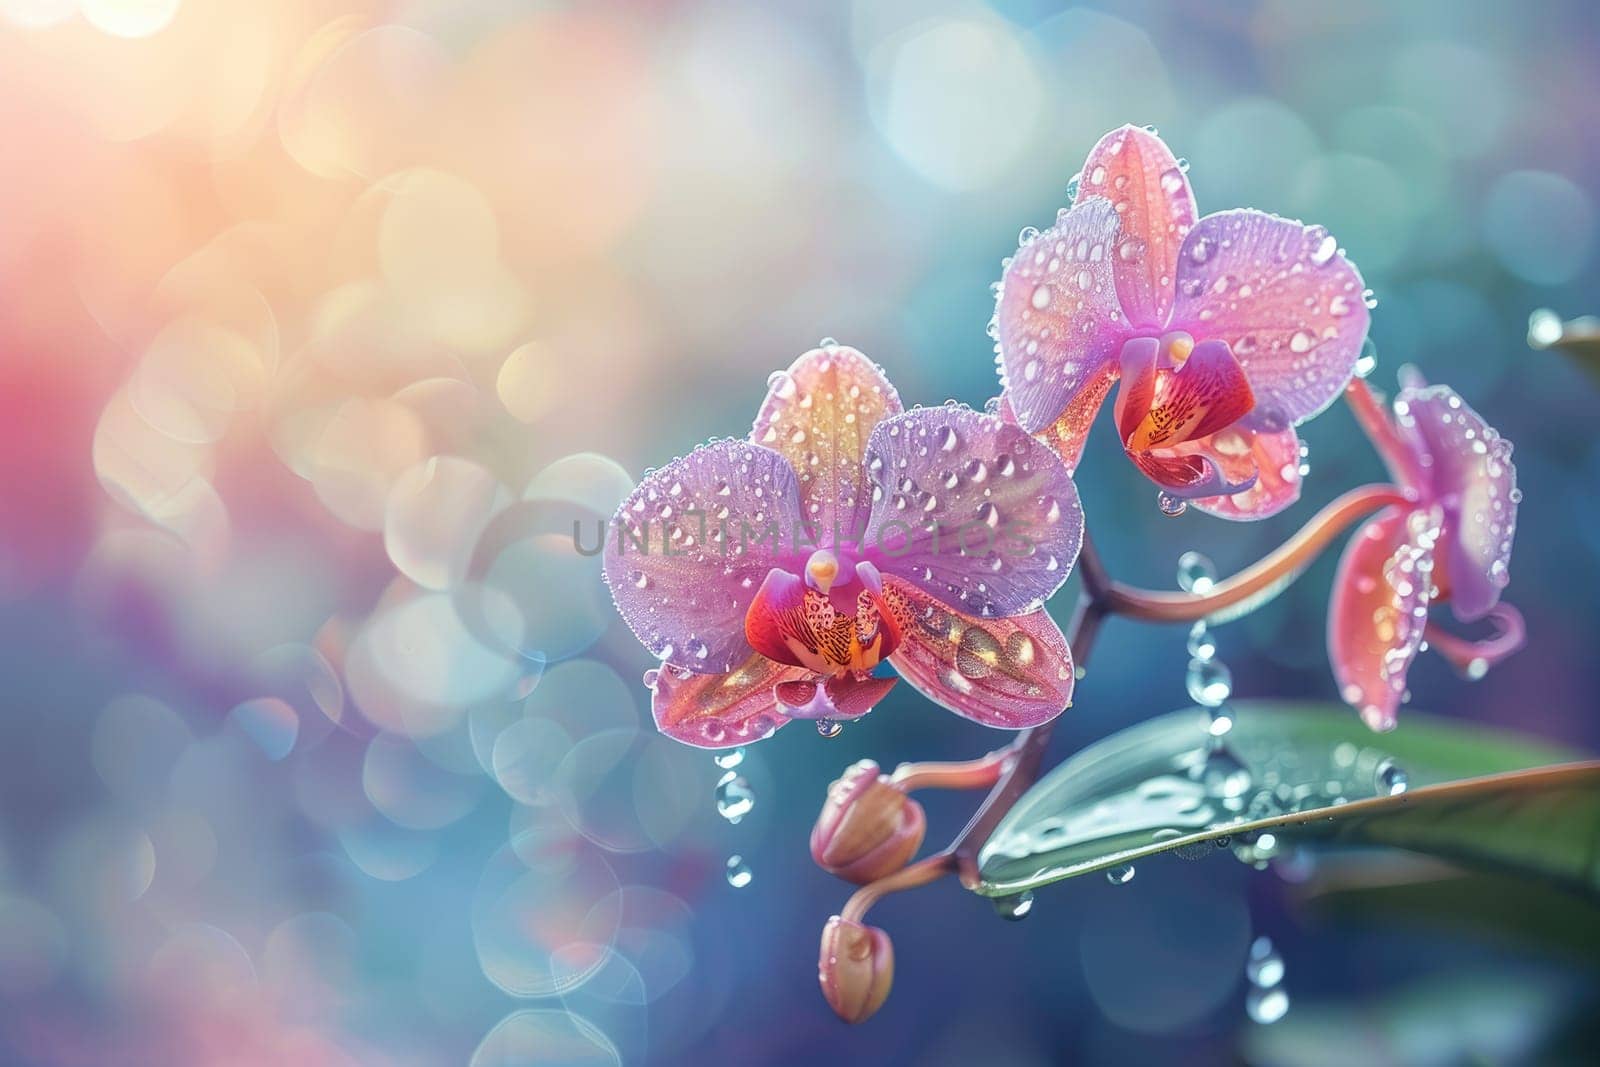 Close up view. Beautiful Orchid isolated with drops of water on the petals. by Chawagen